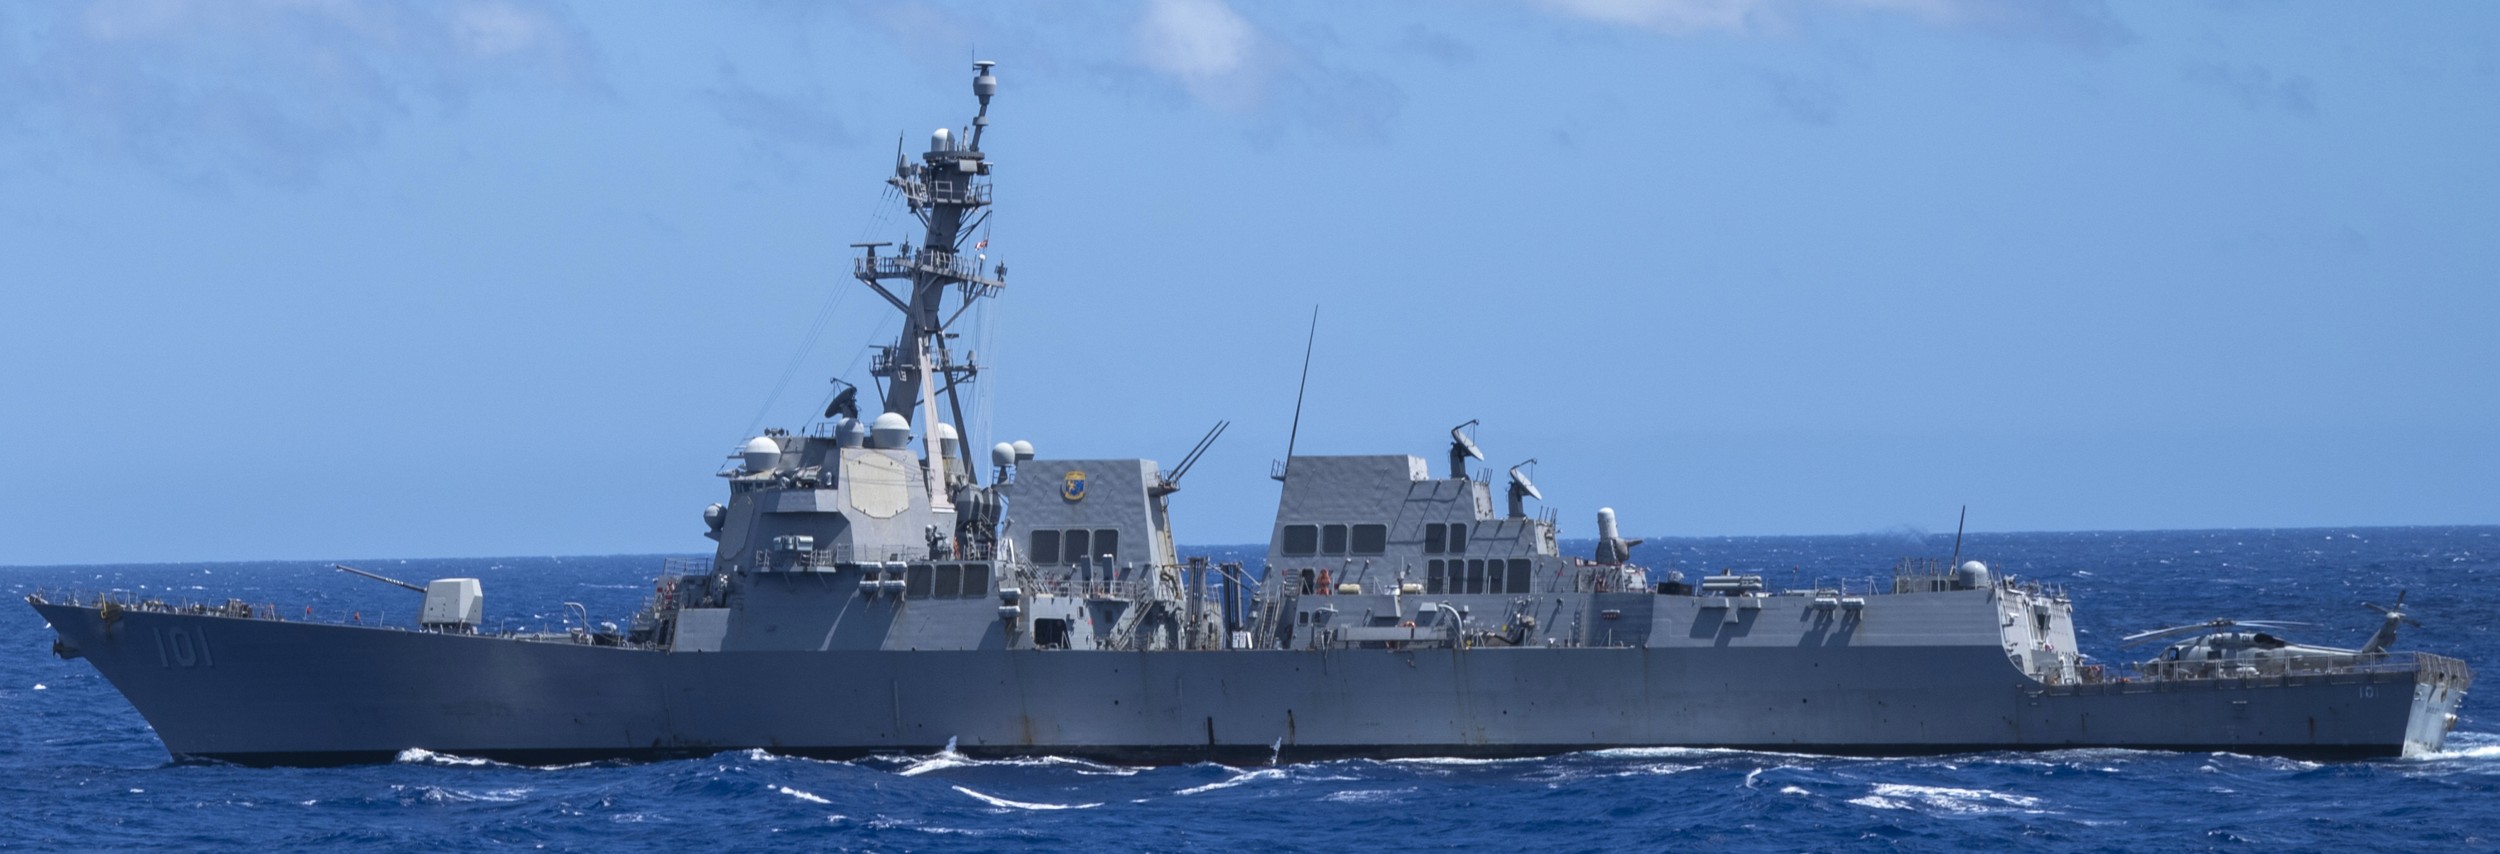 ddg-101 uss gridley arleigh burke class guided missile destroyer aegis us navy exercise rimpac 2022 83